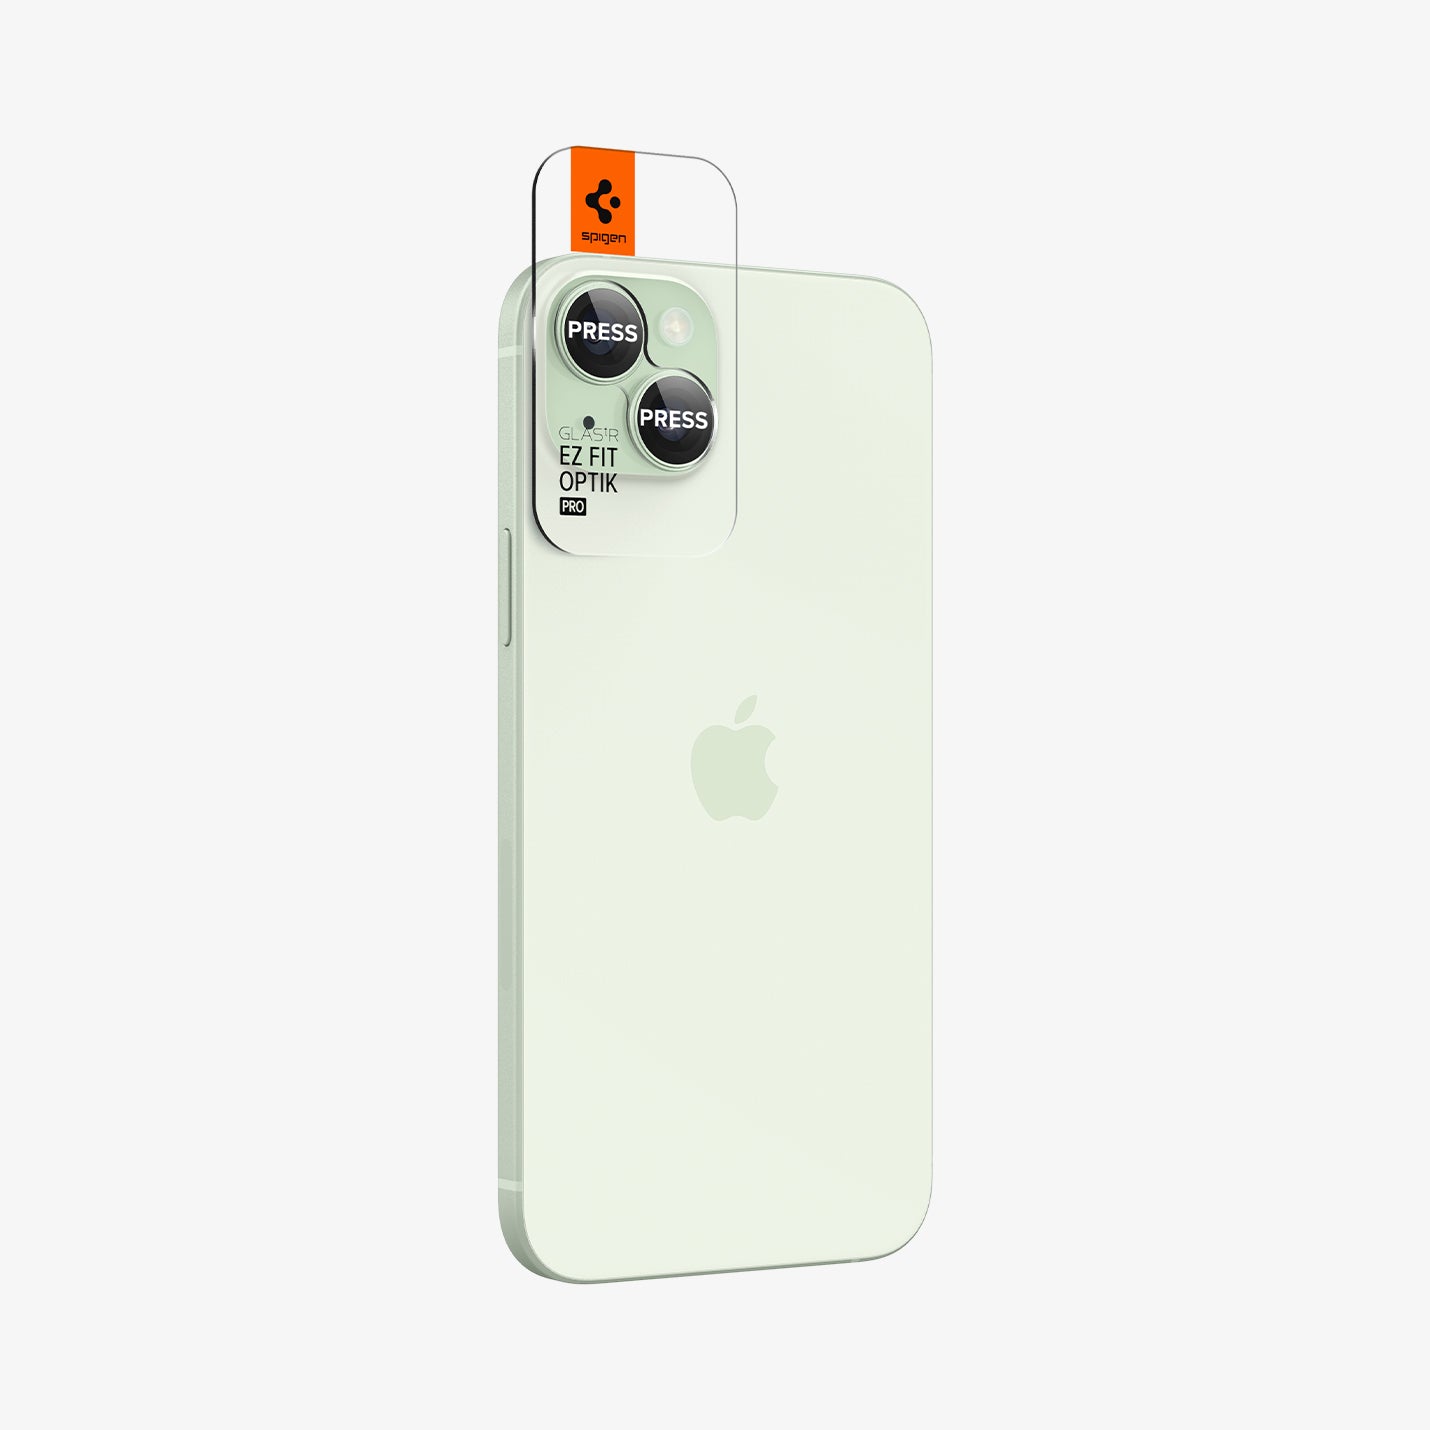 AGL07169 - iPhone 15 Plus Optik Pro EZ Fit Lens Protector in Green showing the back, partial side and optic tray aligned with the device lens